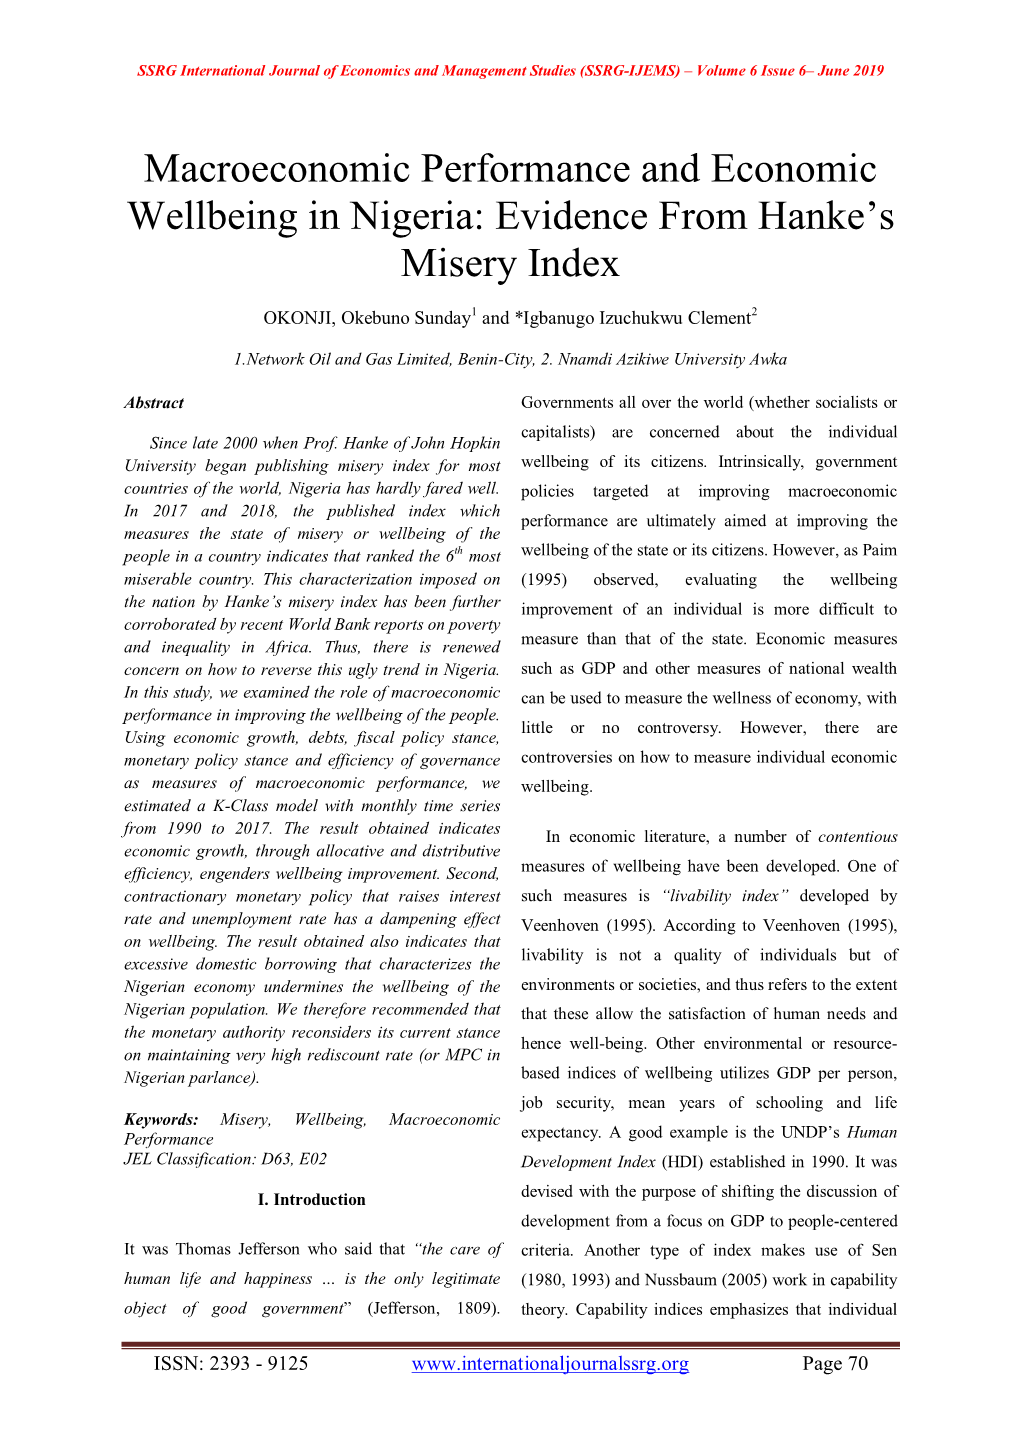 Macroeconomic Performance and Economic Wellbeing in Nigeria: Evidence from Hanke’S Misery Index